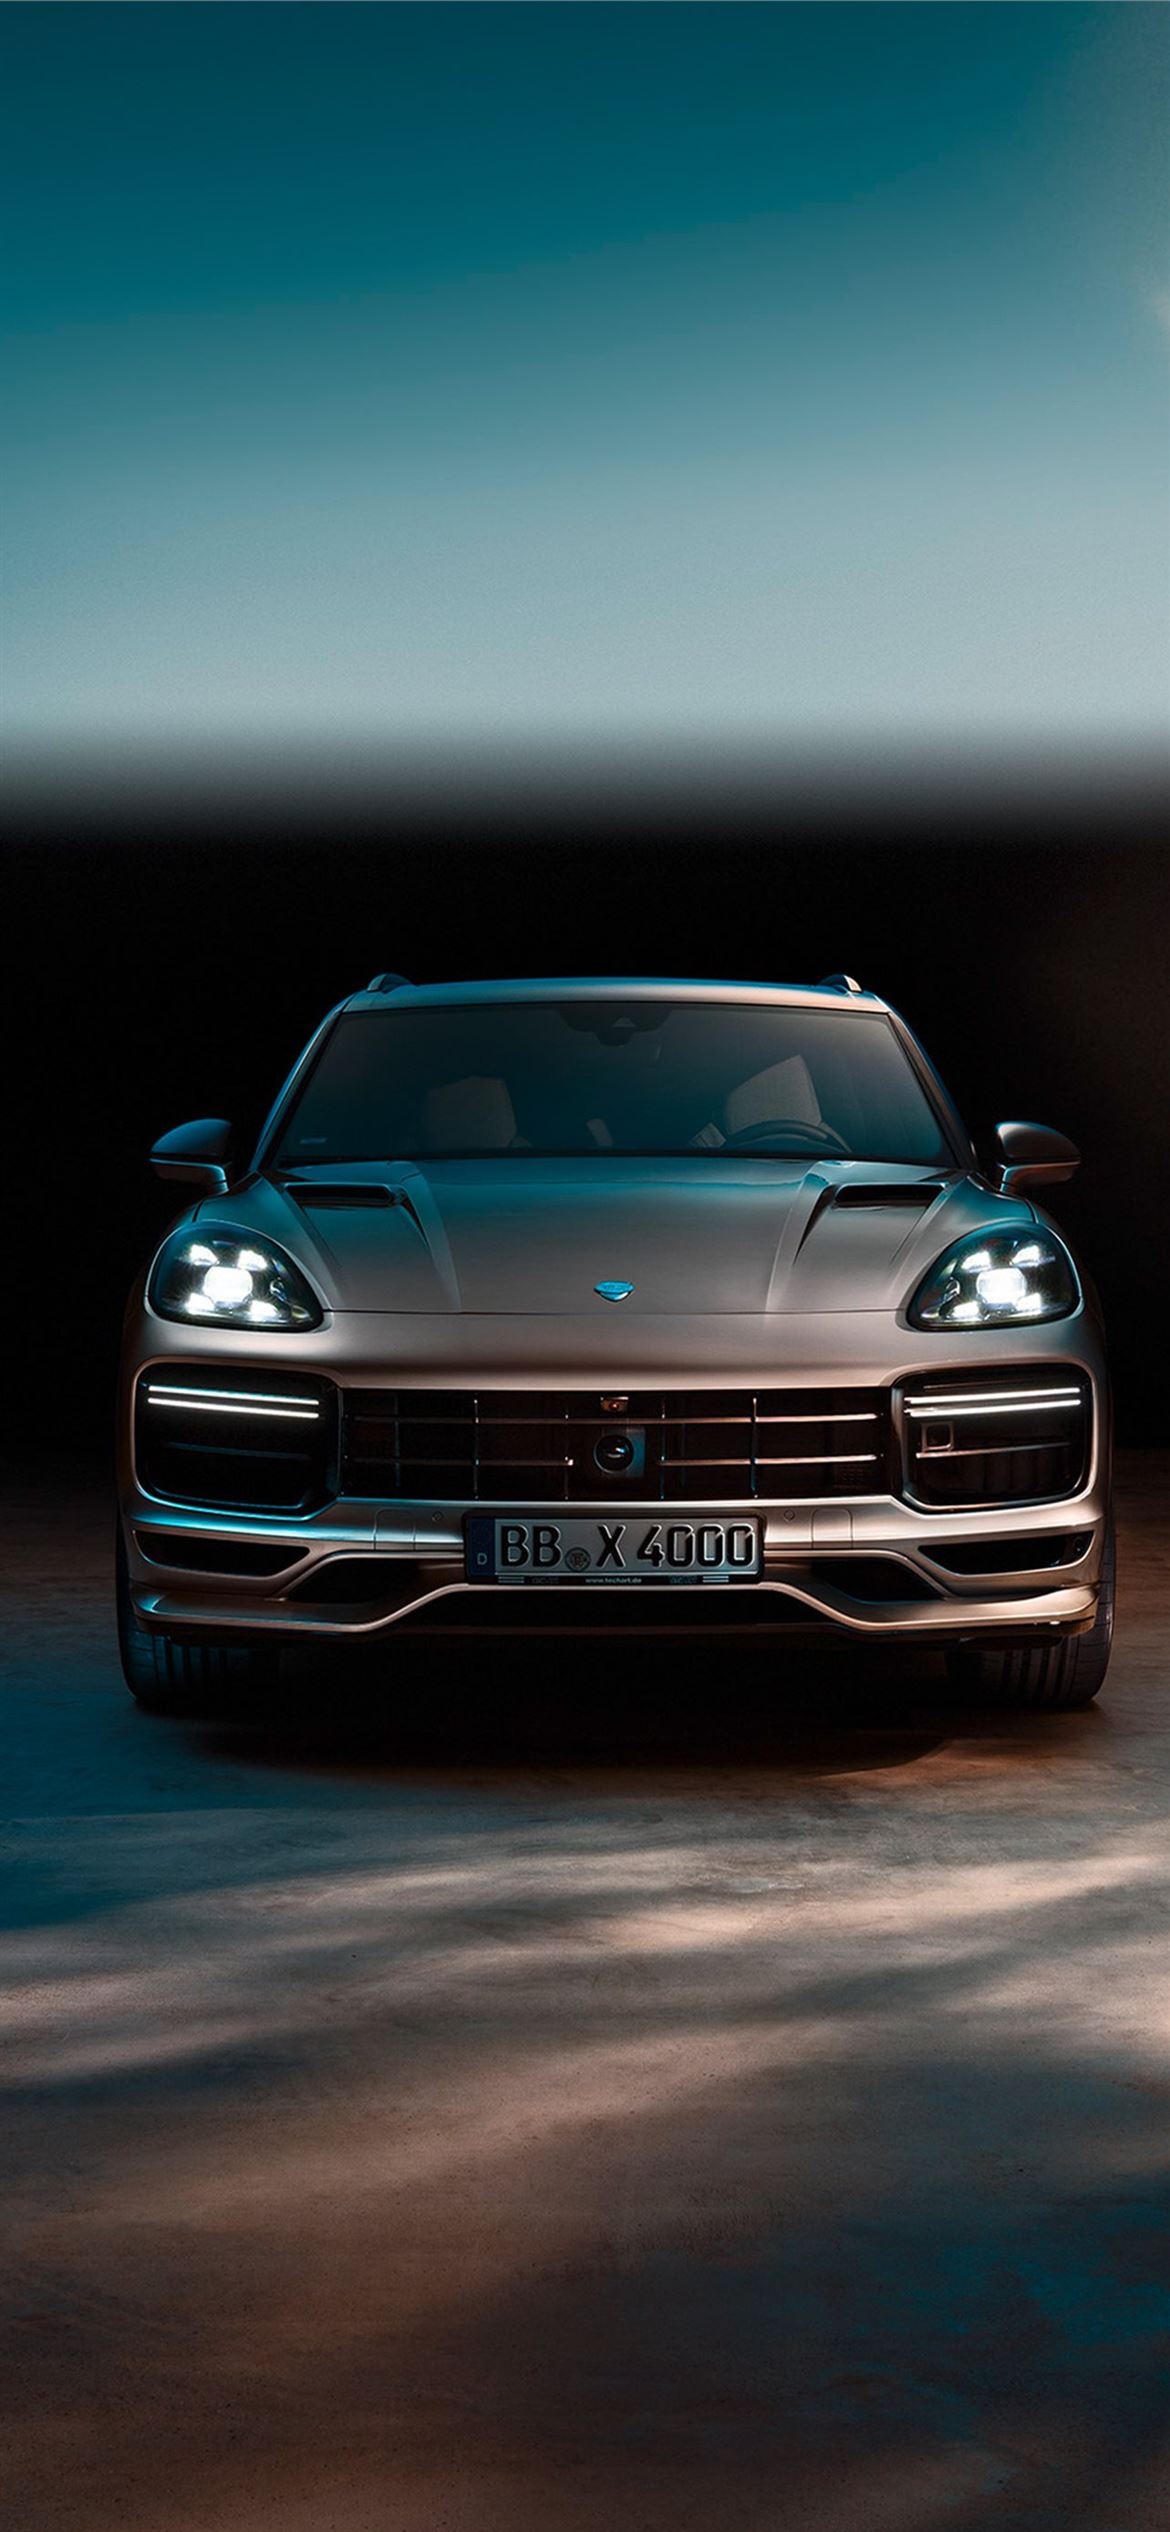 Porsche Cayenne, iPhone wallpapers, Stylish backgrounds, Premium visuals, 1170x2540 HD Phone